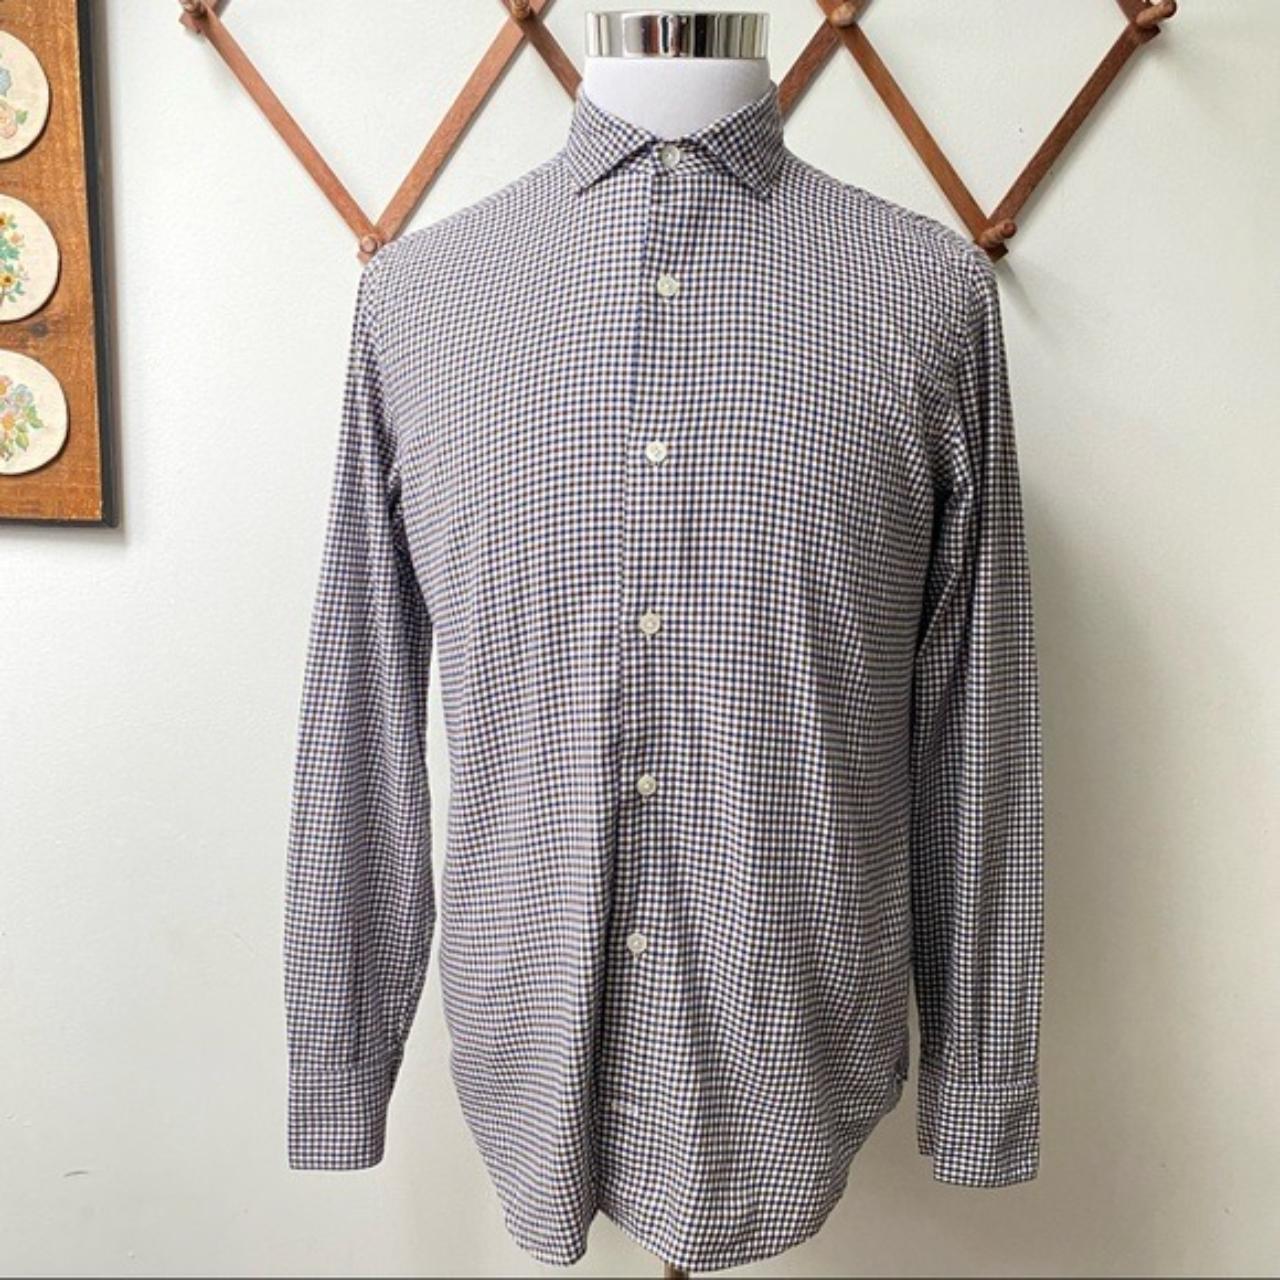 Product Image 1 - Eleventy Checkered Button Down Shirt

Brand: